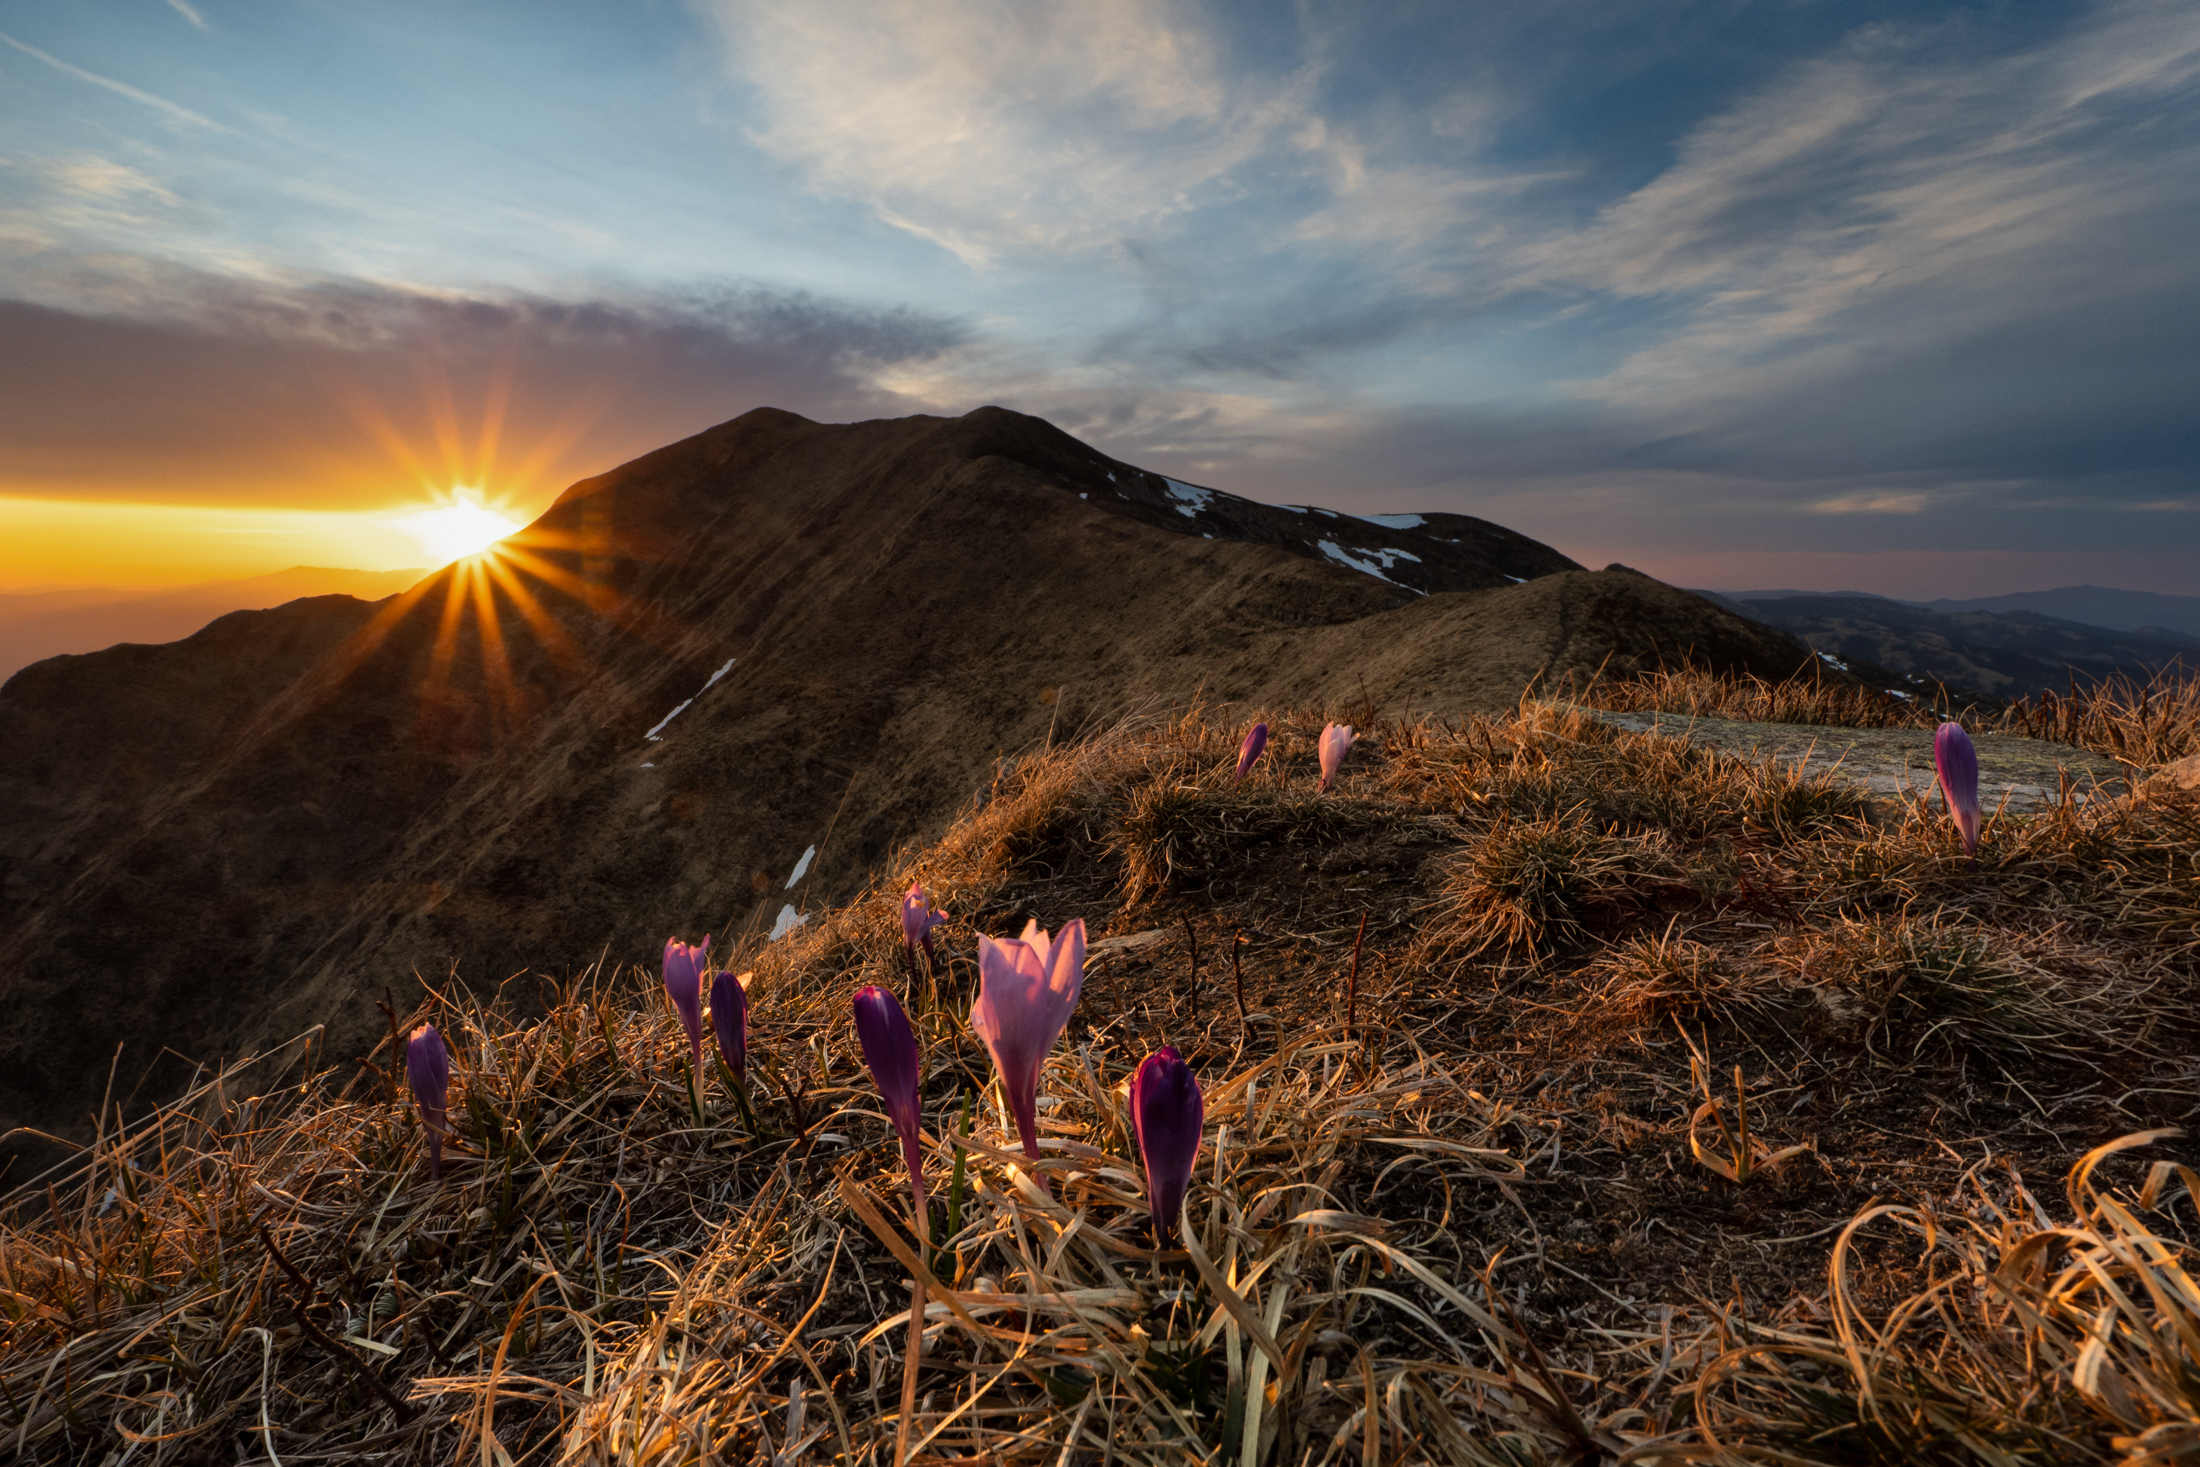 Spring at the summit...